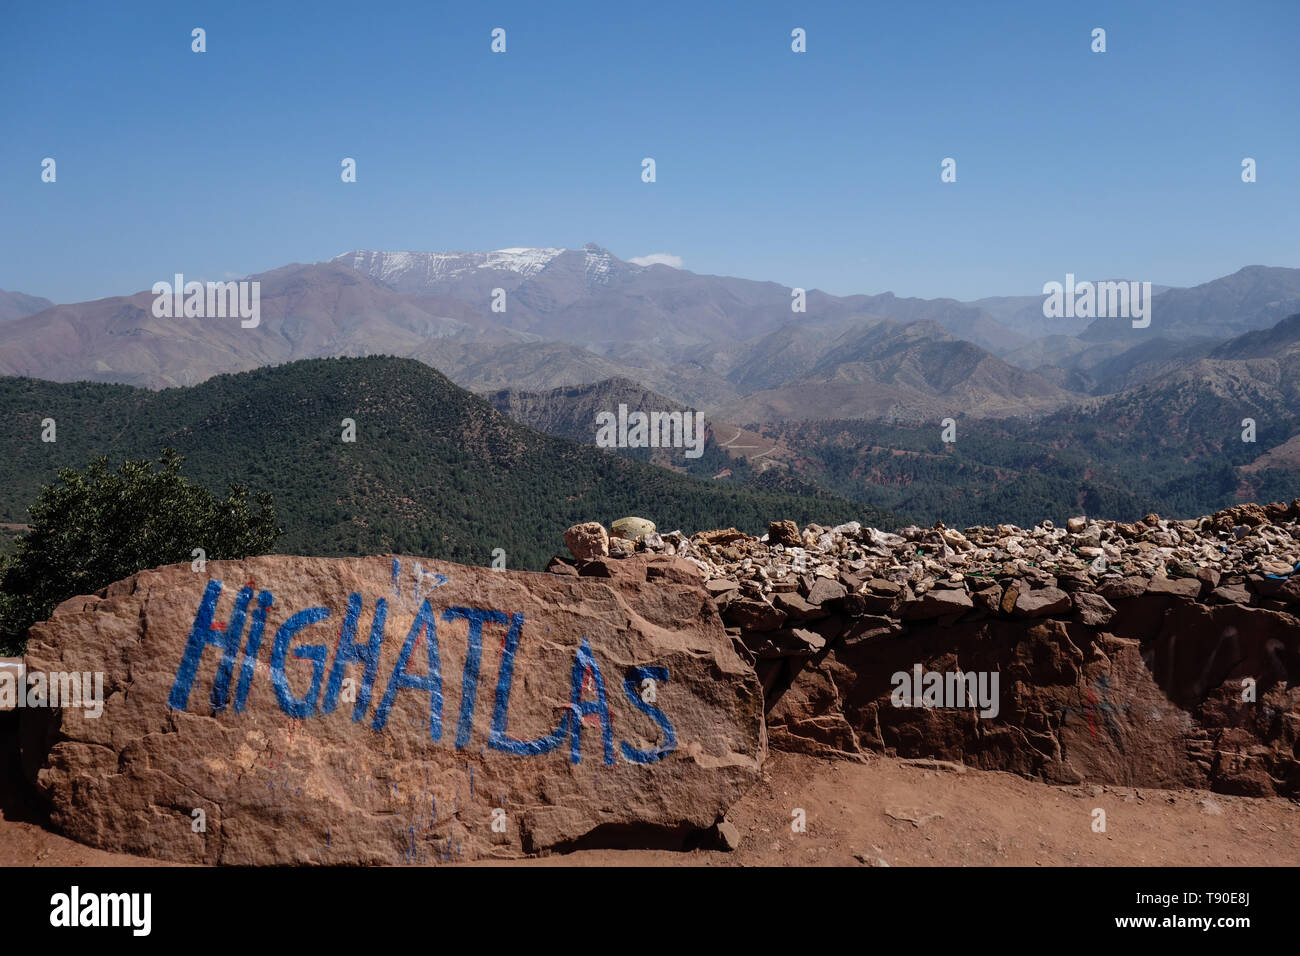 High Atlas Mountains outlook with a blue painted sign between Marrakesh and Ouarzazate, Morocco Stock Photo